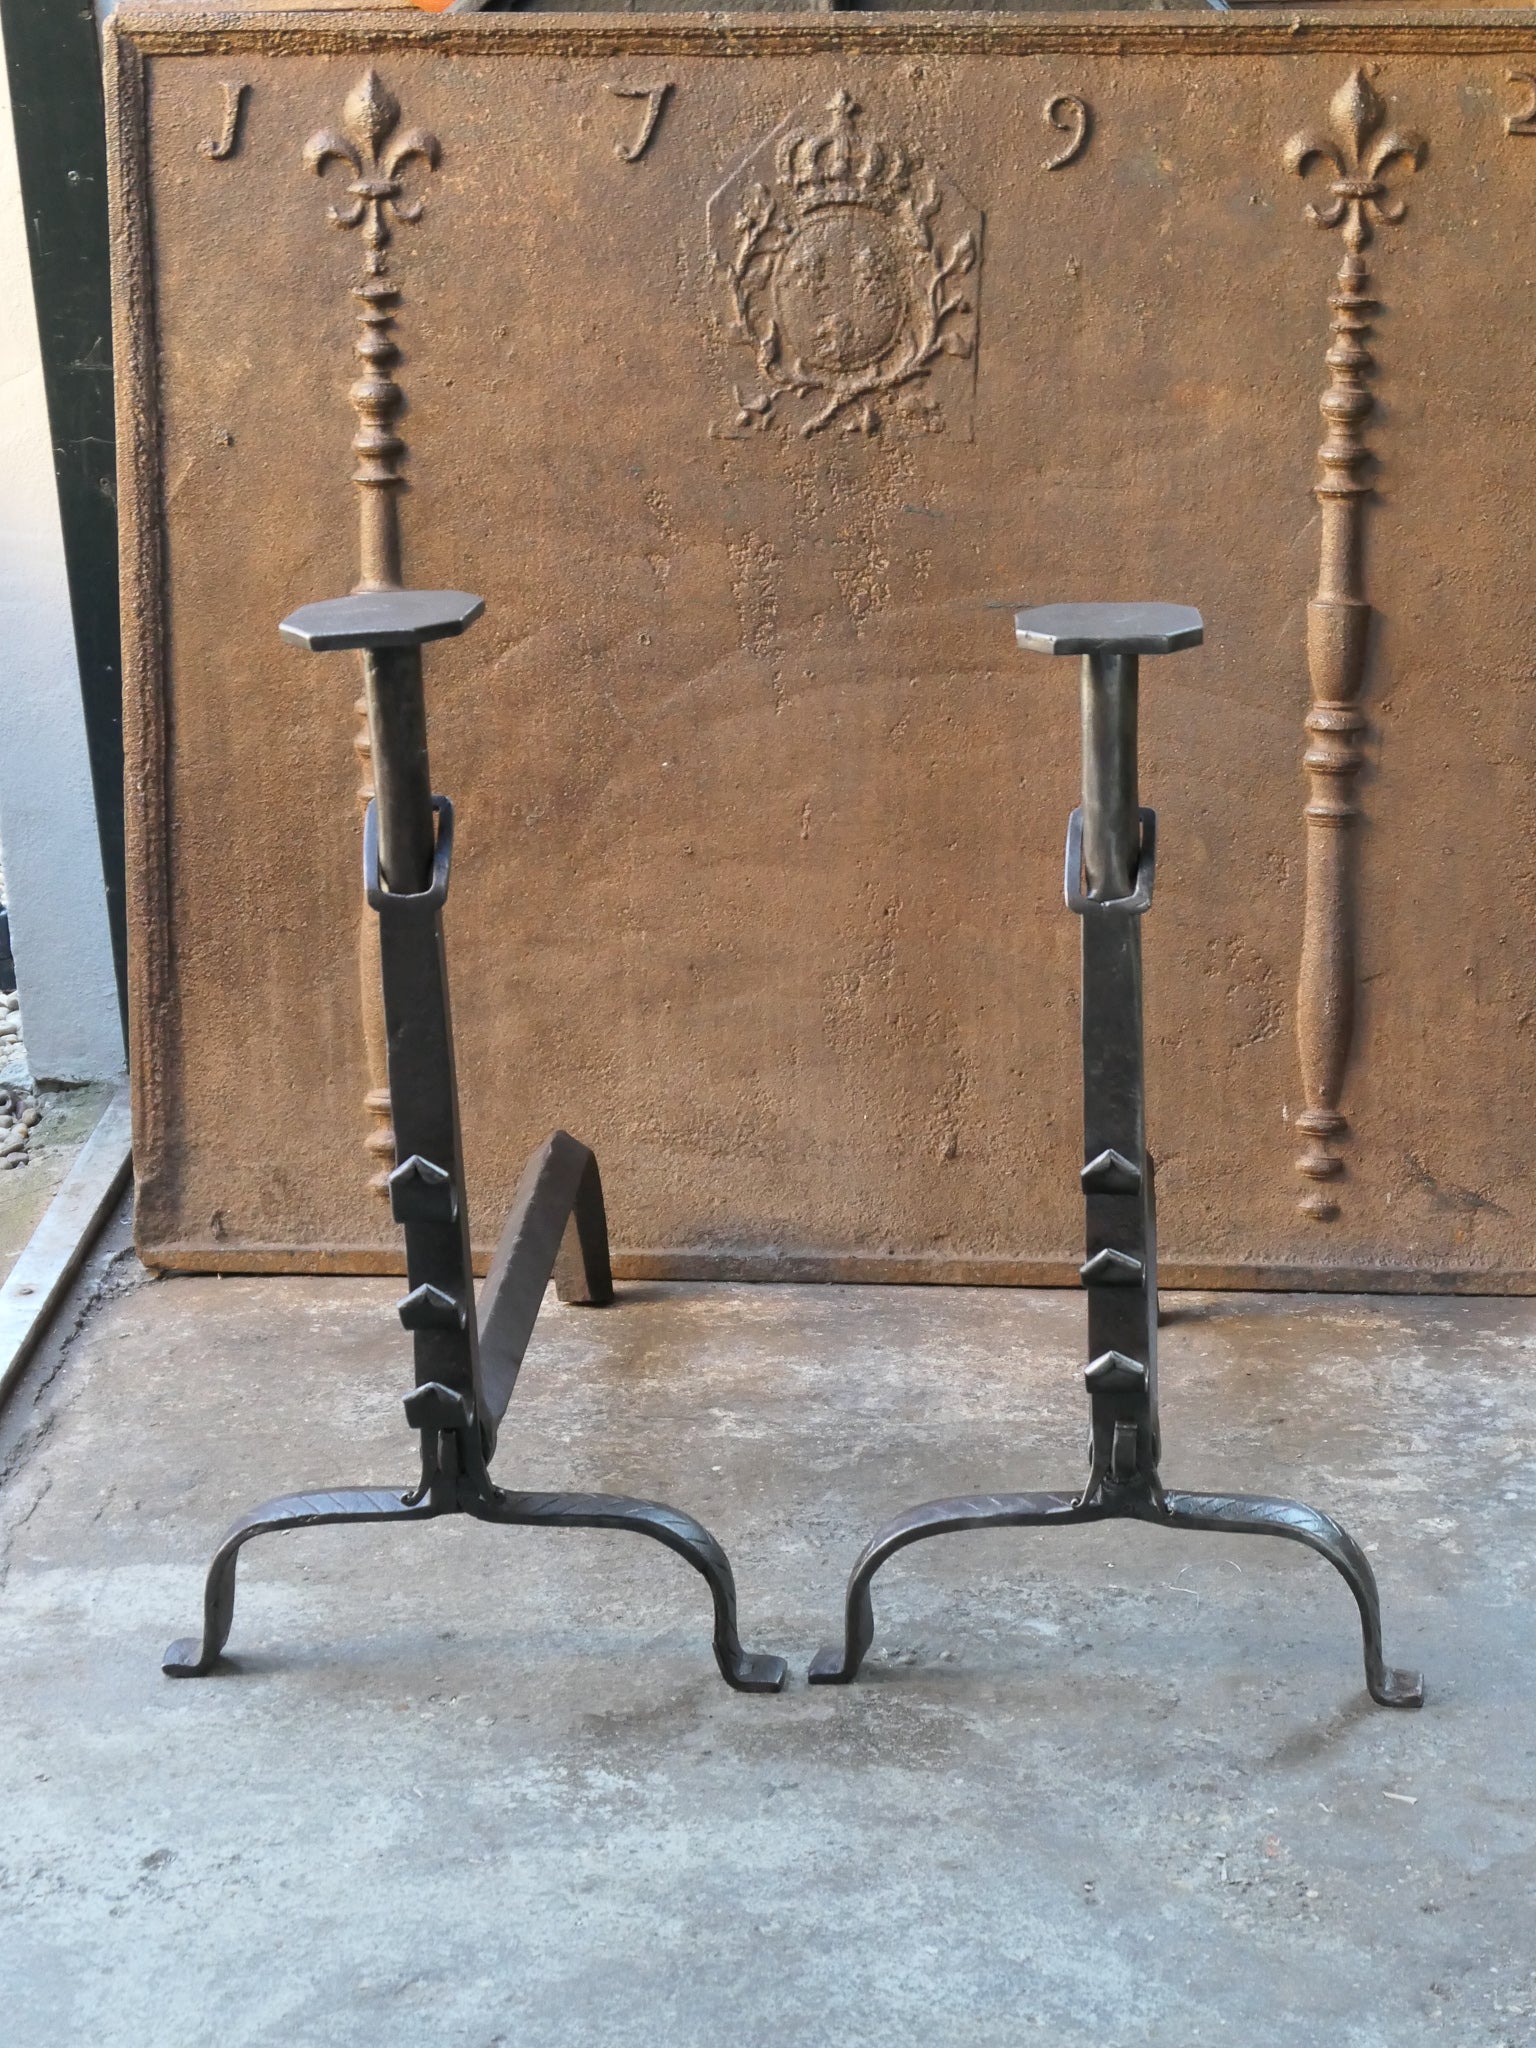 18th century French andirons - fire dogs made of wrought iron. These French andirons are called 'landiers' in France. This dates from the times the andirons were the main cooking equipment in the house. They had spit hooks to grill meat or poultry